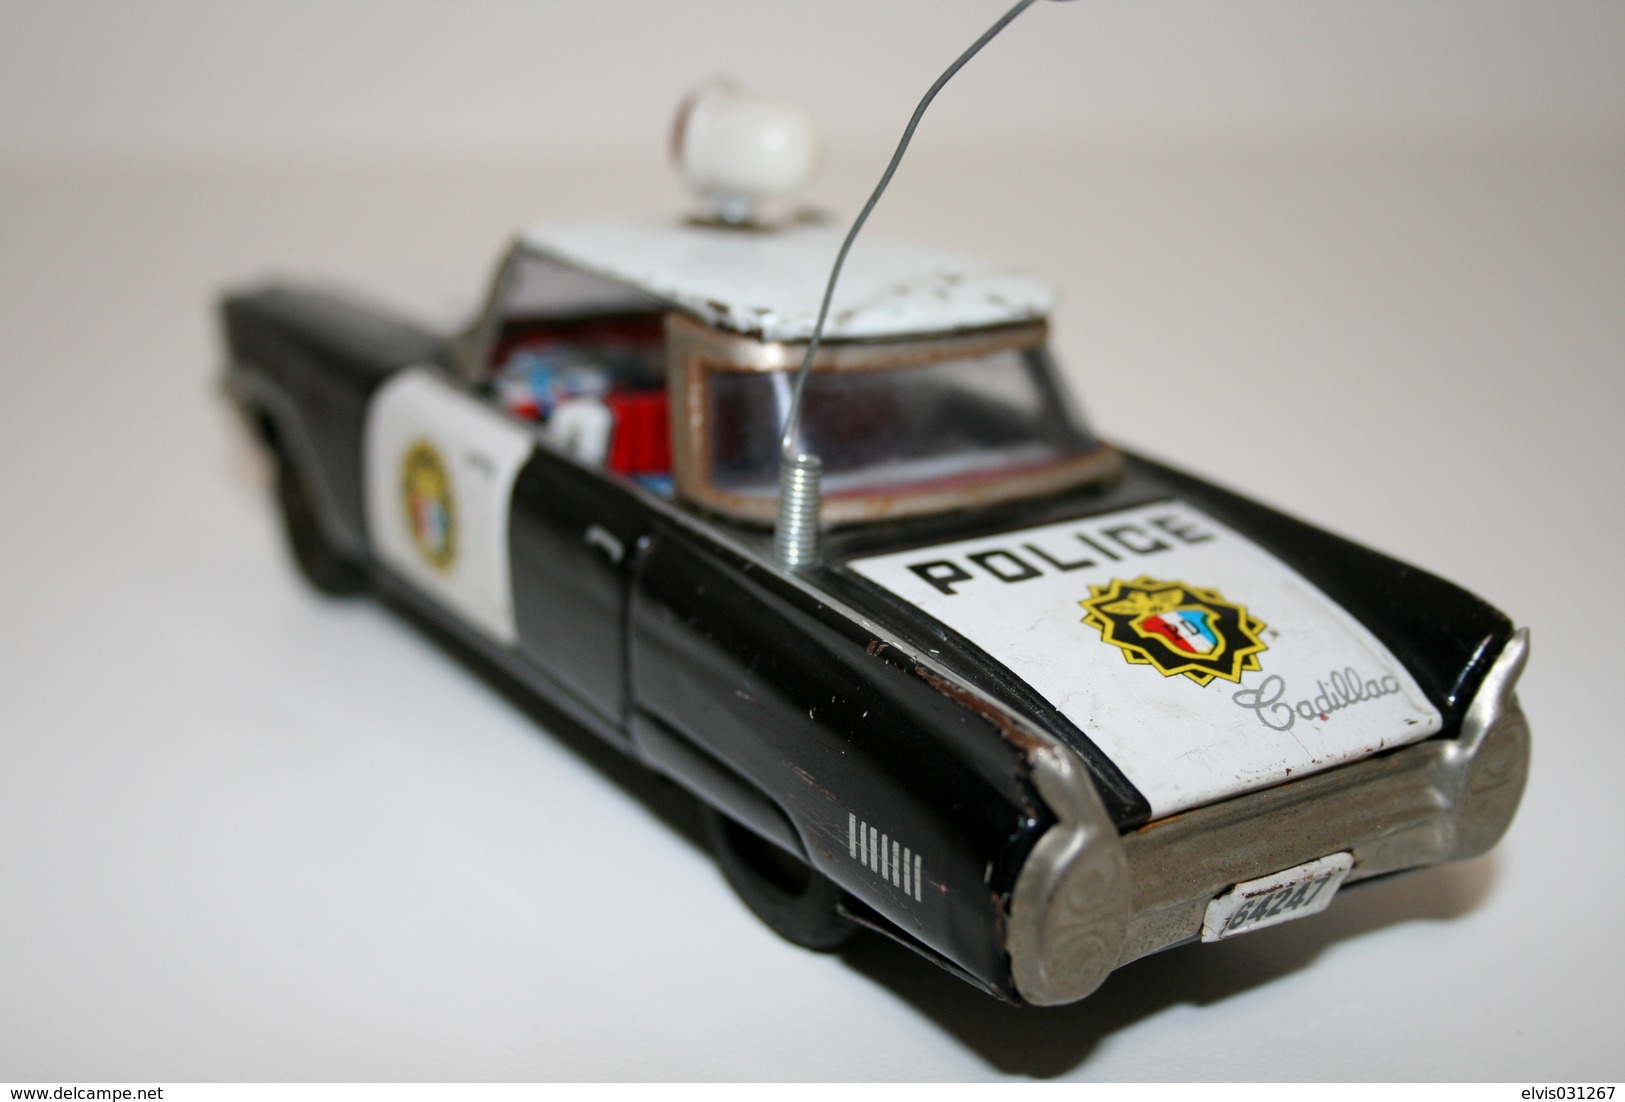 Vintage TIN TOY CAR : Maker ICHICO - Cadillac 4 Door Hardtop Rotating Roof Light POLICE - 15cm - JAPAN - 1960 - Friction - Collectors Et Insolites - Toutes Marques